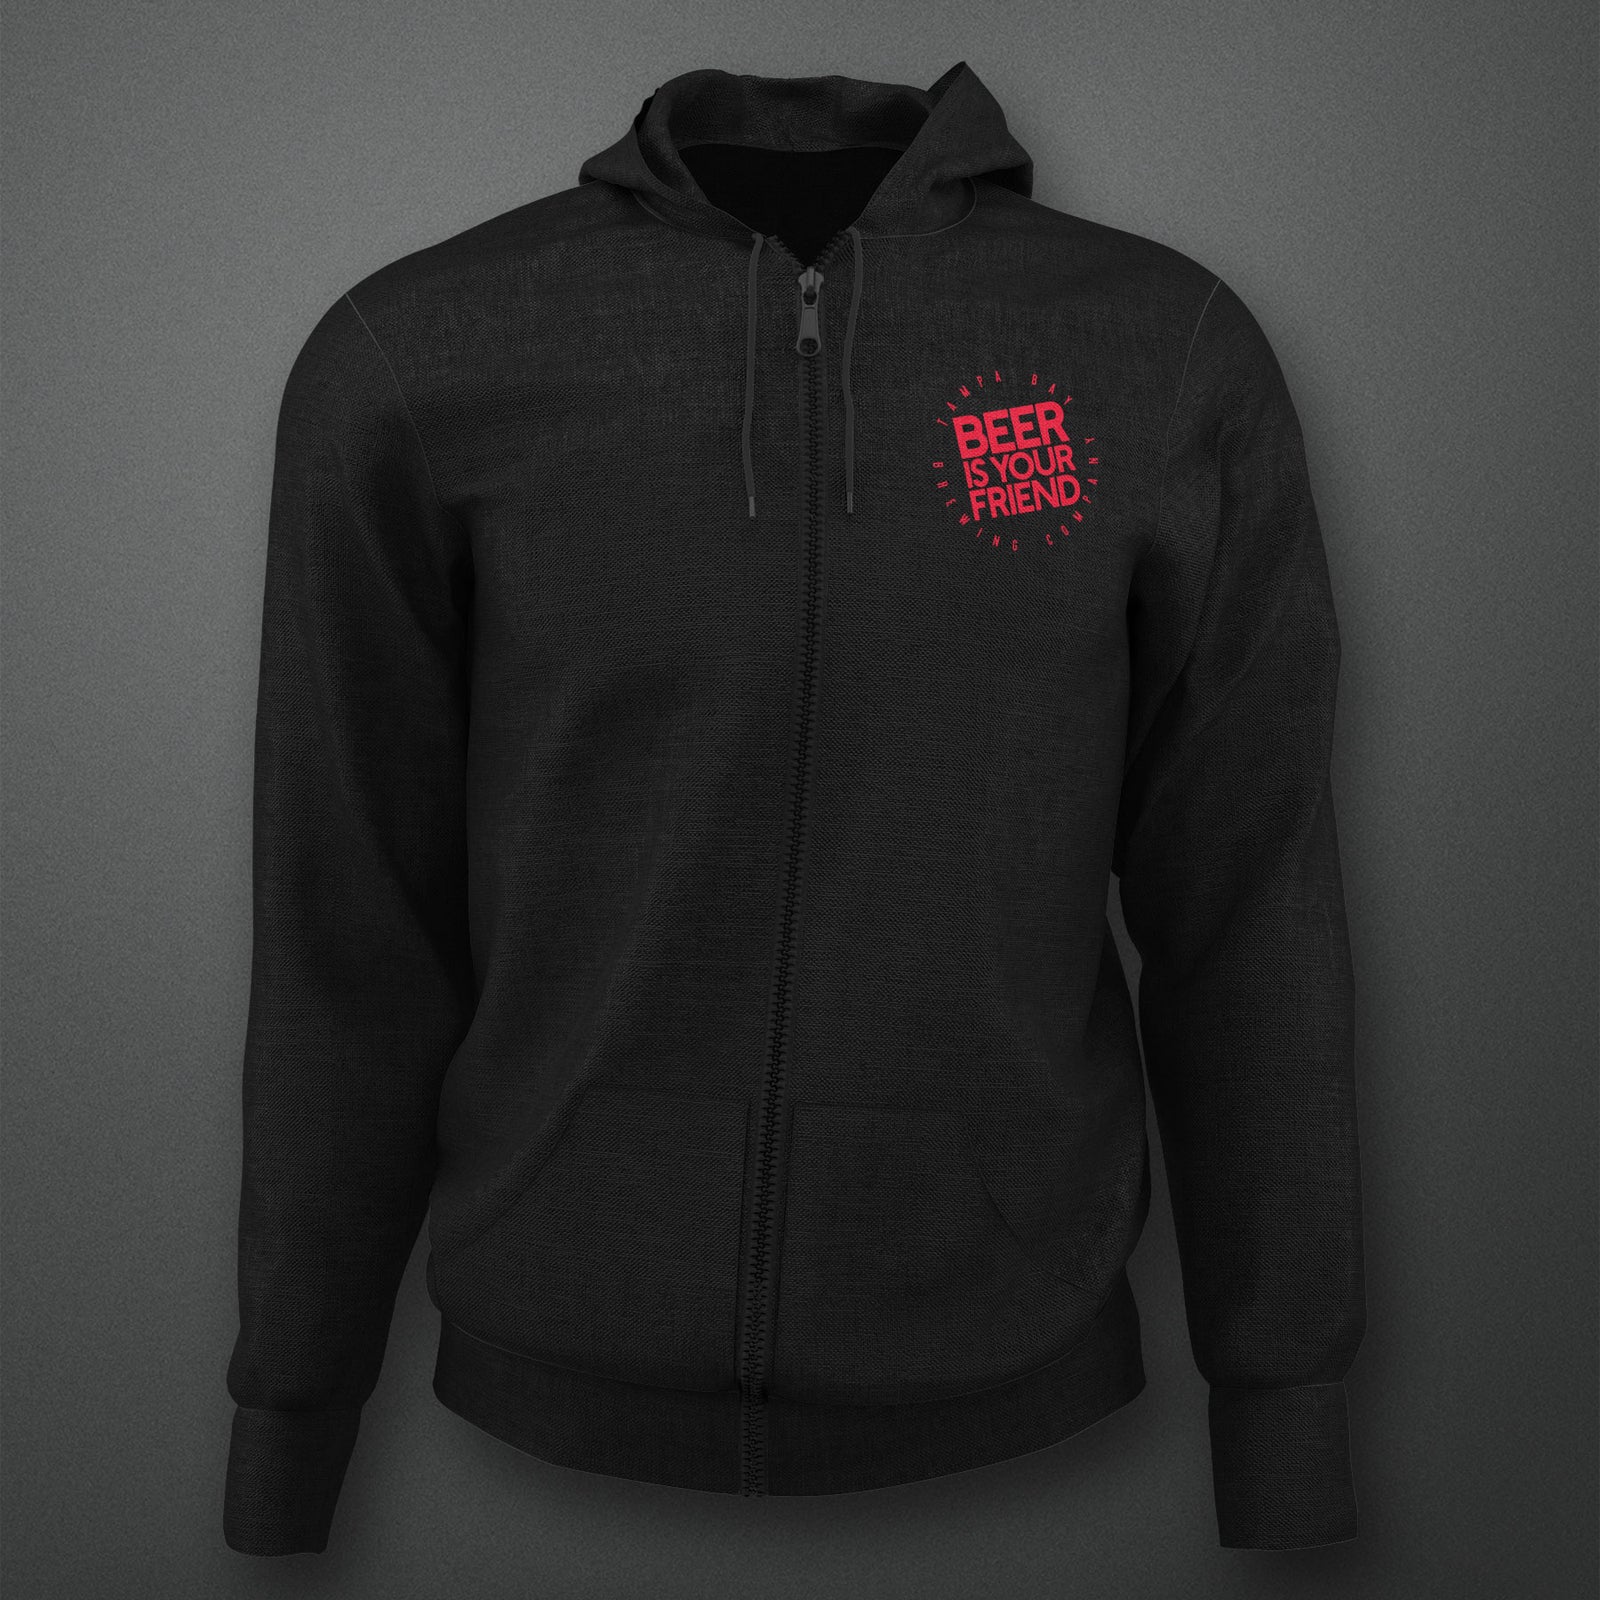 *CLEARANCE* Black Full-Zip Hoodie With TBBC Logo